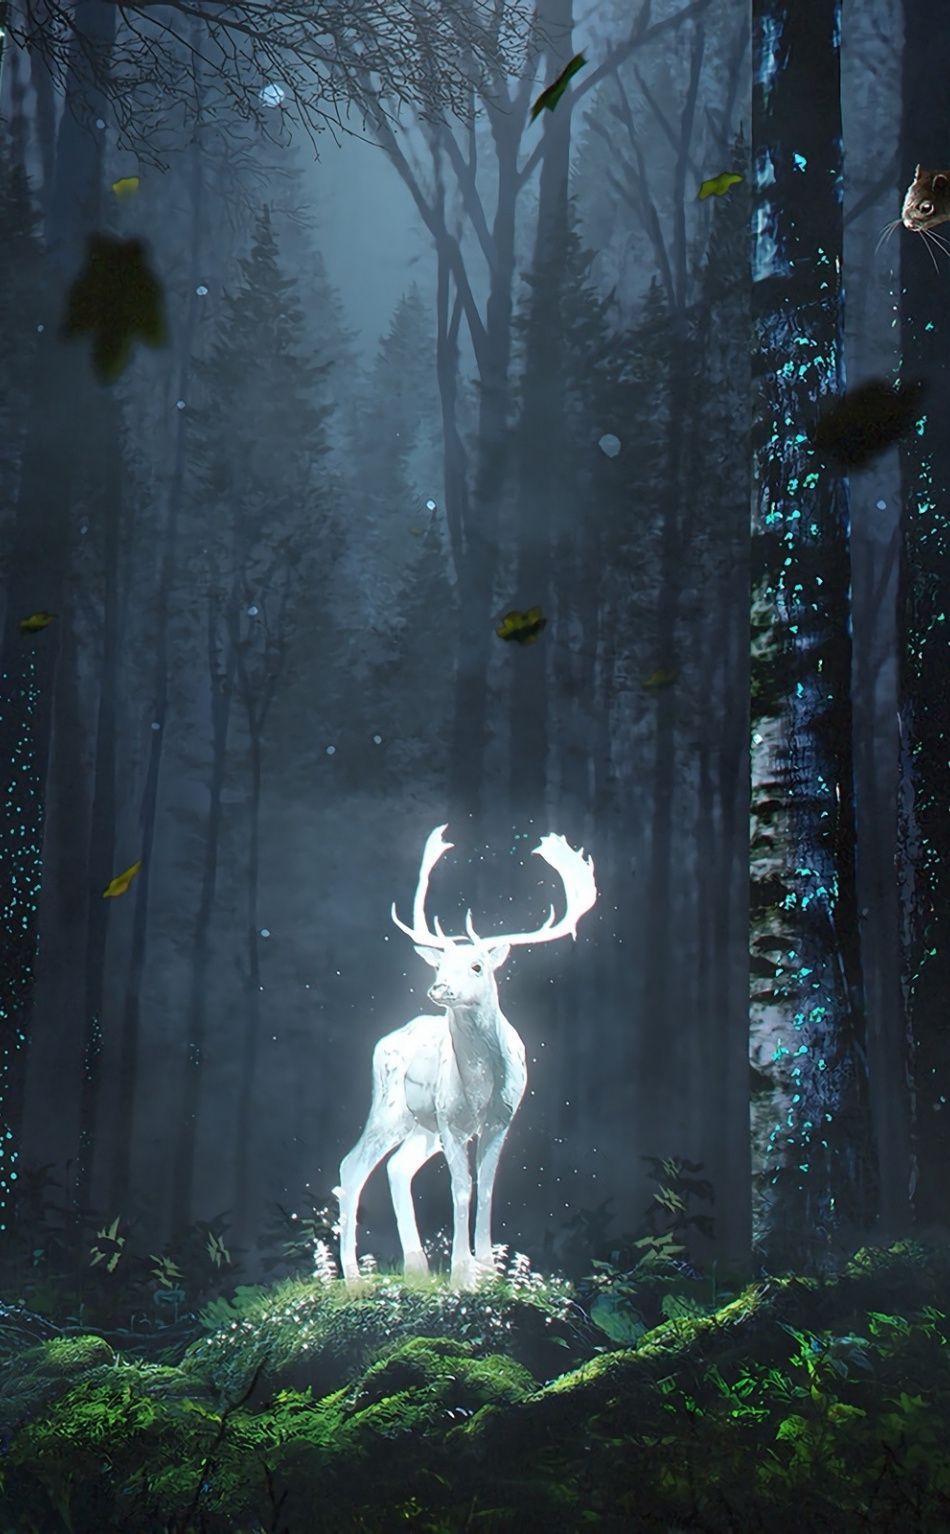 A deer with large antlers stands in a forest with glowing moss and falling leaves. The image is related to fantasy art, creatures, and mystical forests. - Deer